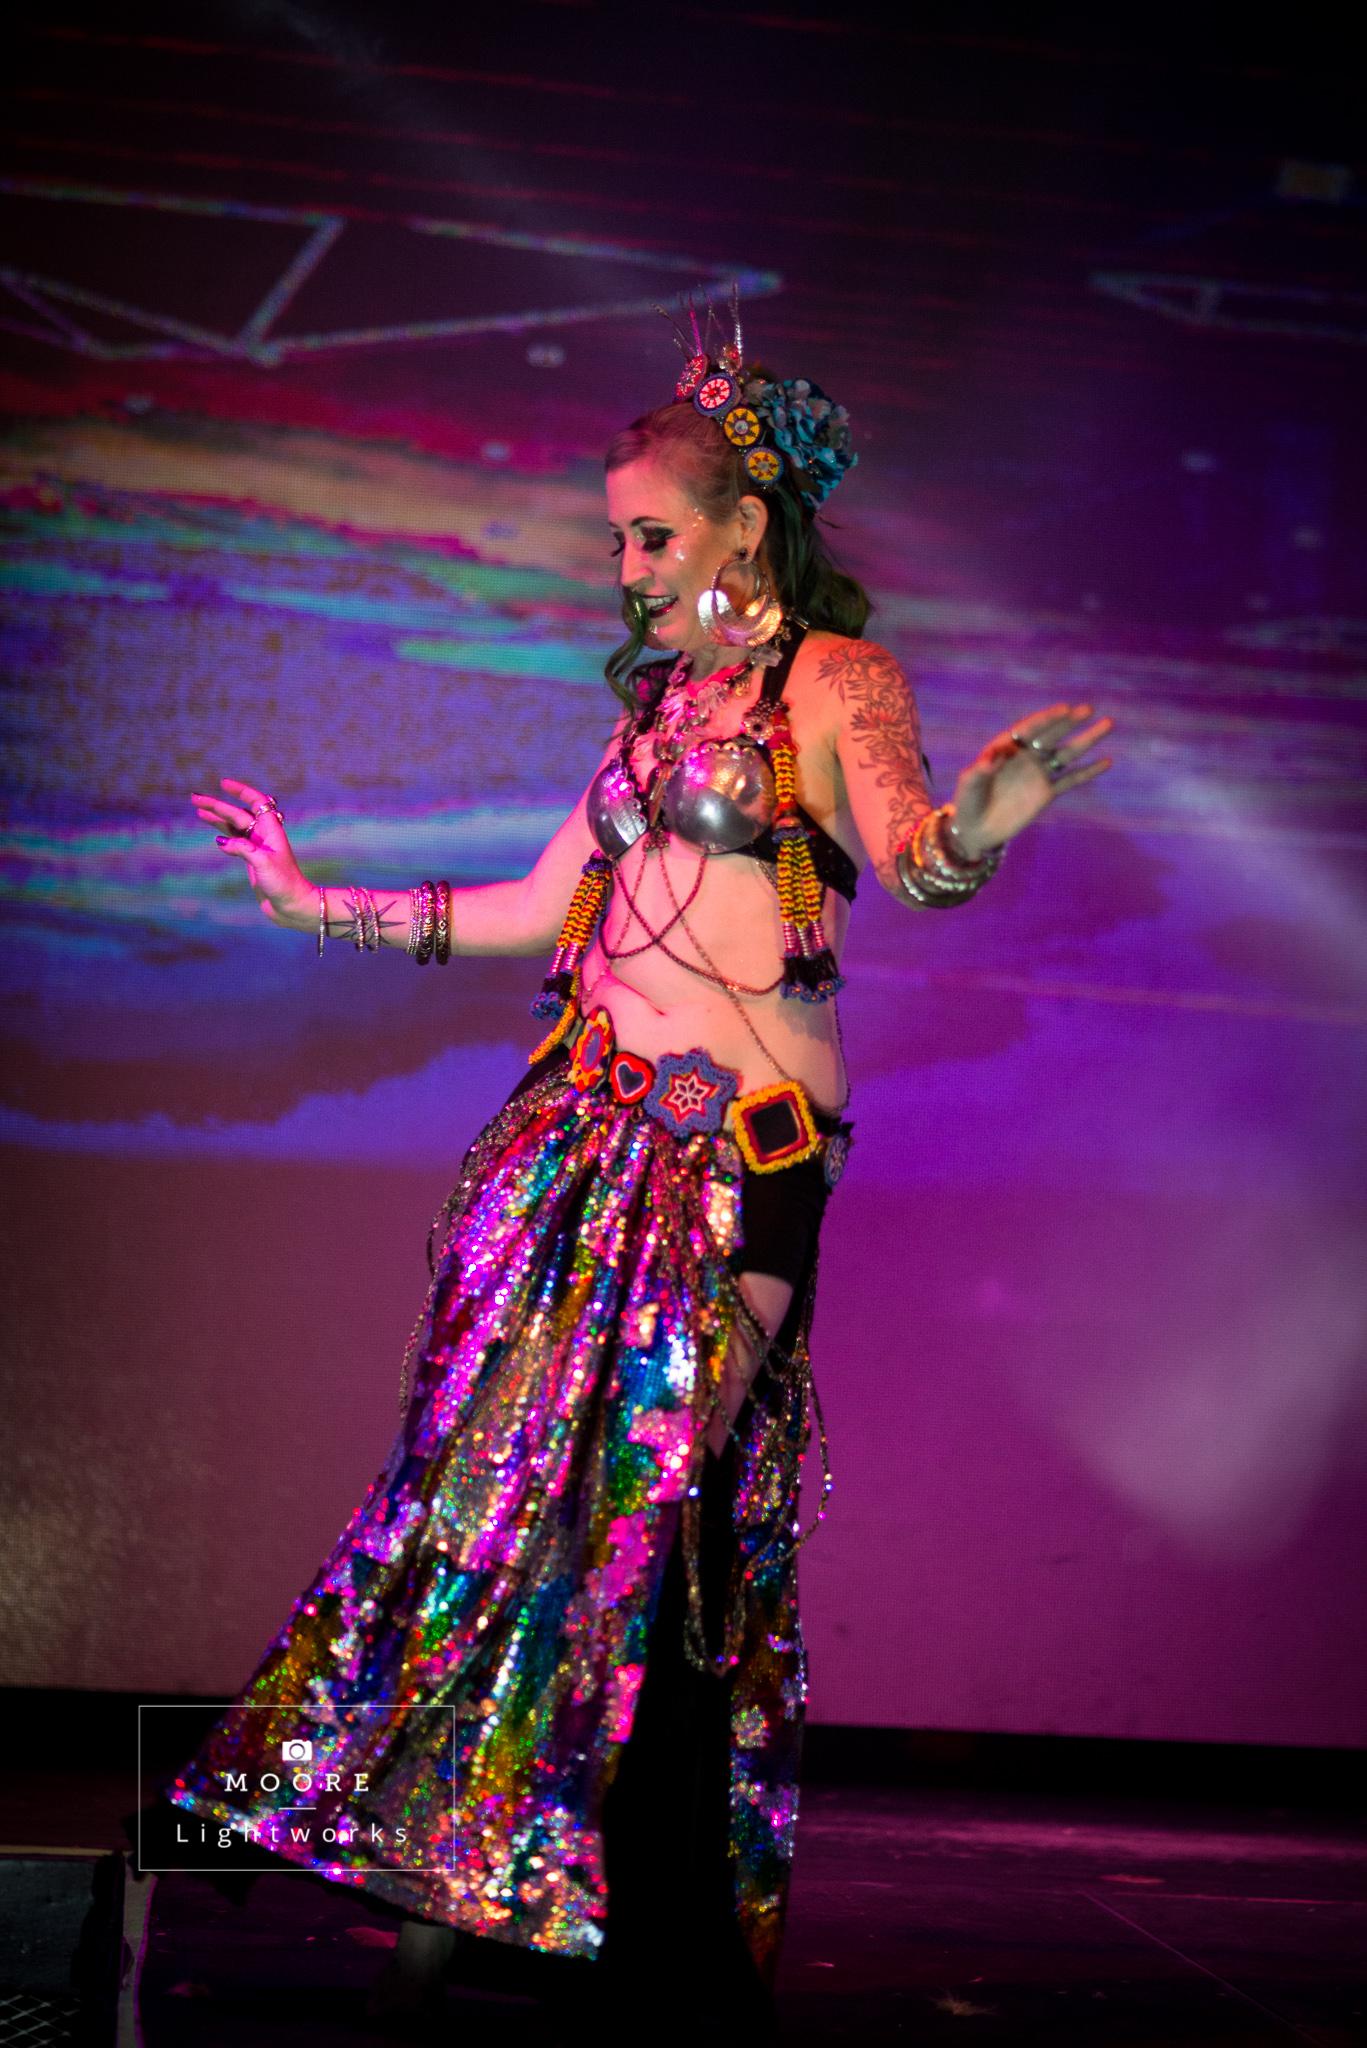 January/ February Beginner Fusion Belly Dance Fundamentals - 6 week session